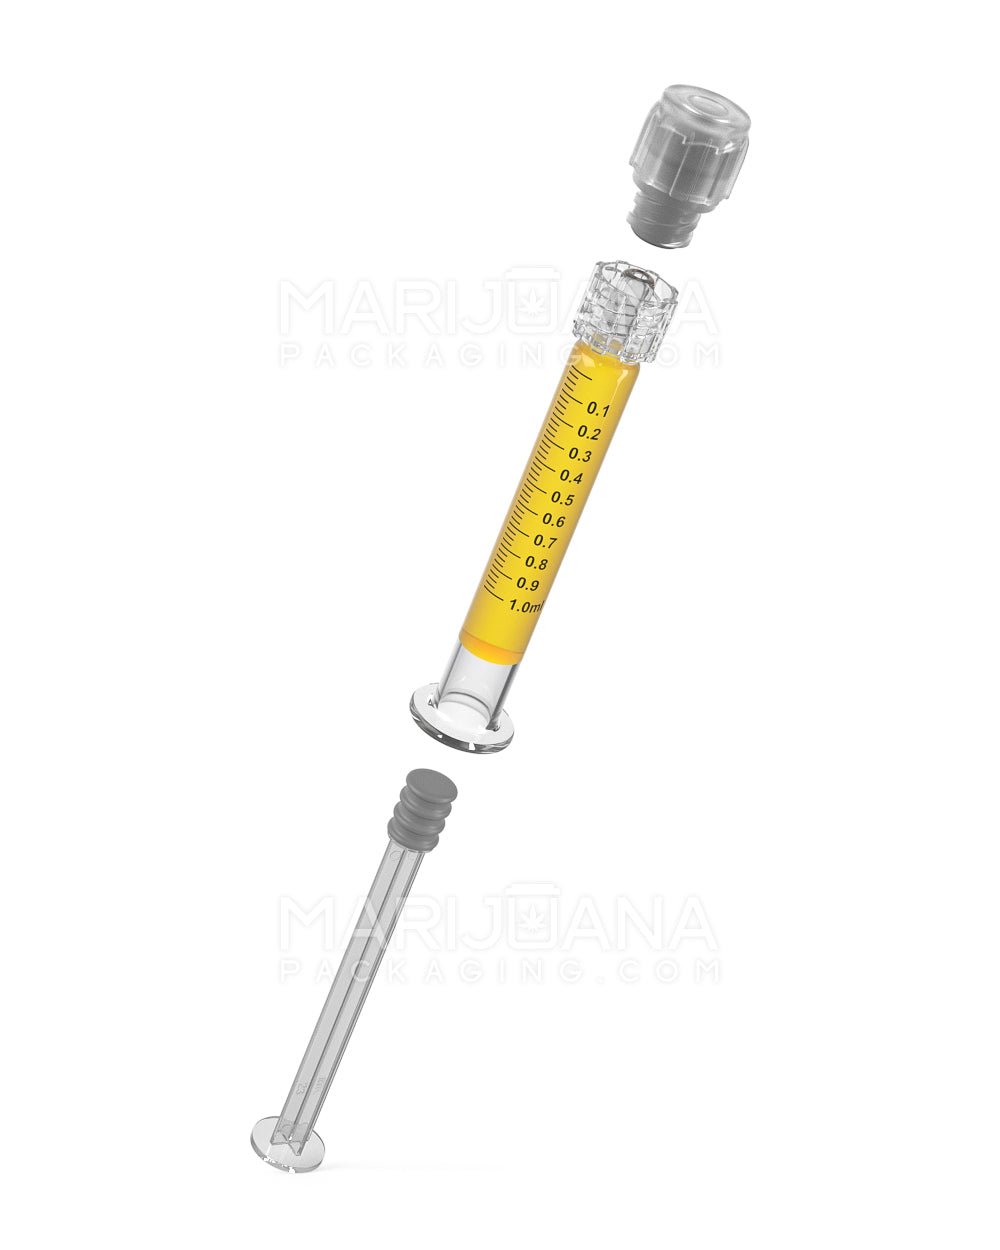 Child Resistant & Luer Lock | Long Glass Dab Applicator Syringes | 1mL - 0.1mL Increments - 100 Count - 7